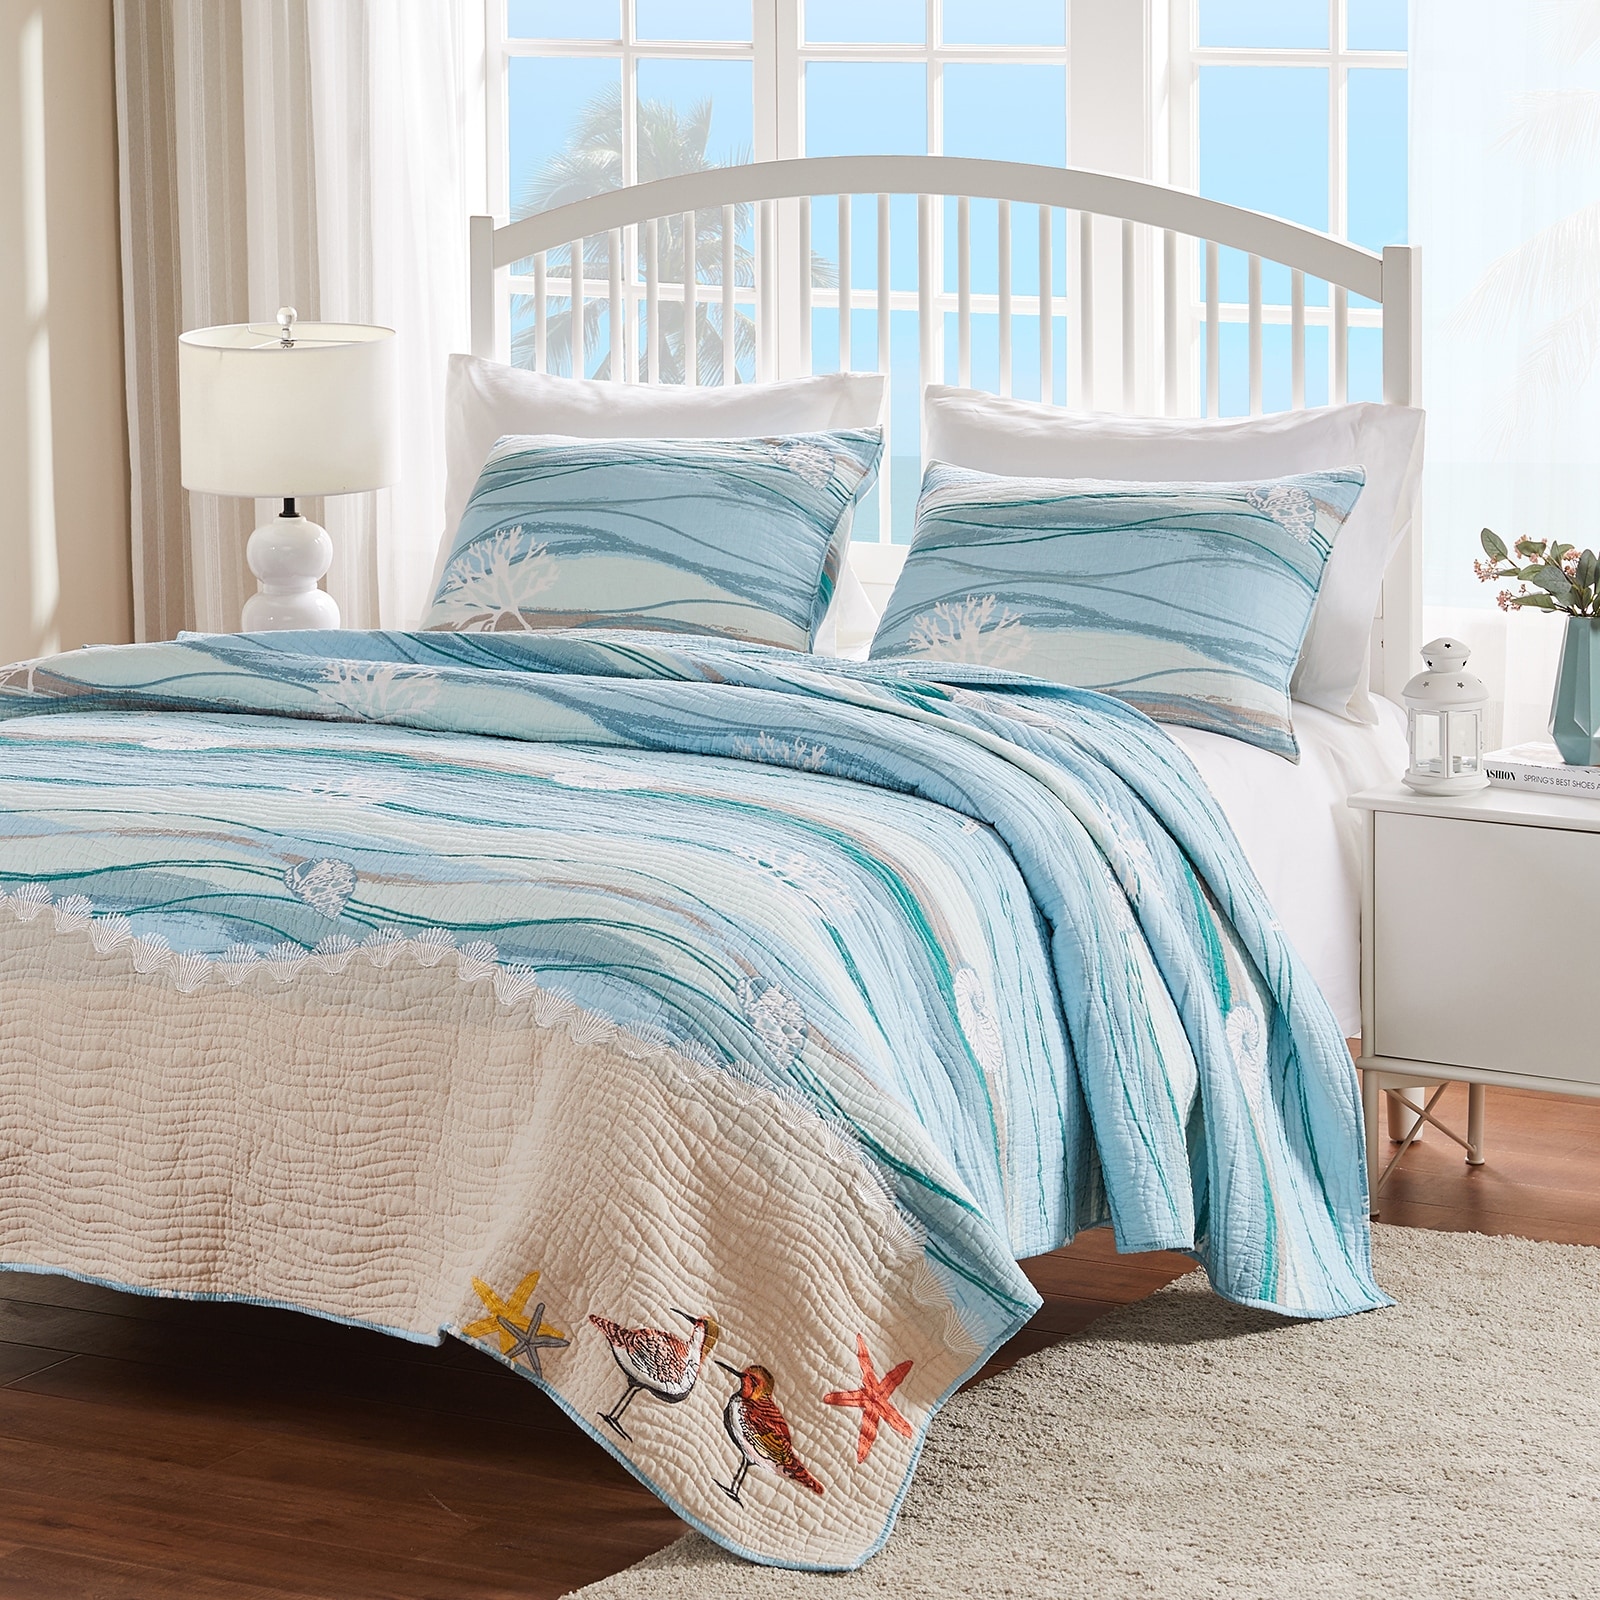 InterestPrint Sea Wave Beach Quilted Throw Blanket Soft Bedding Quilt for All Season 70x80